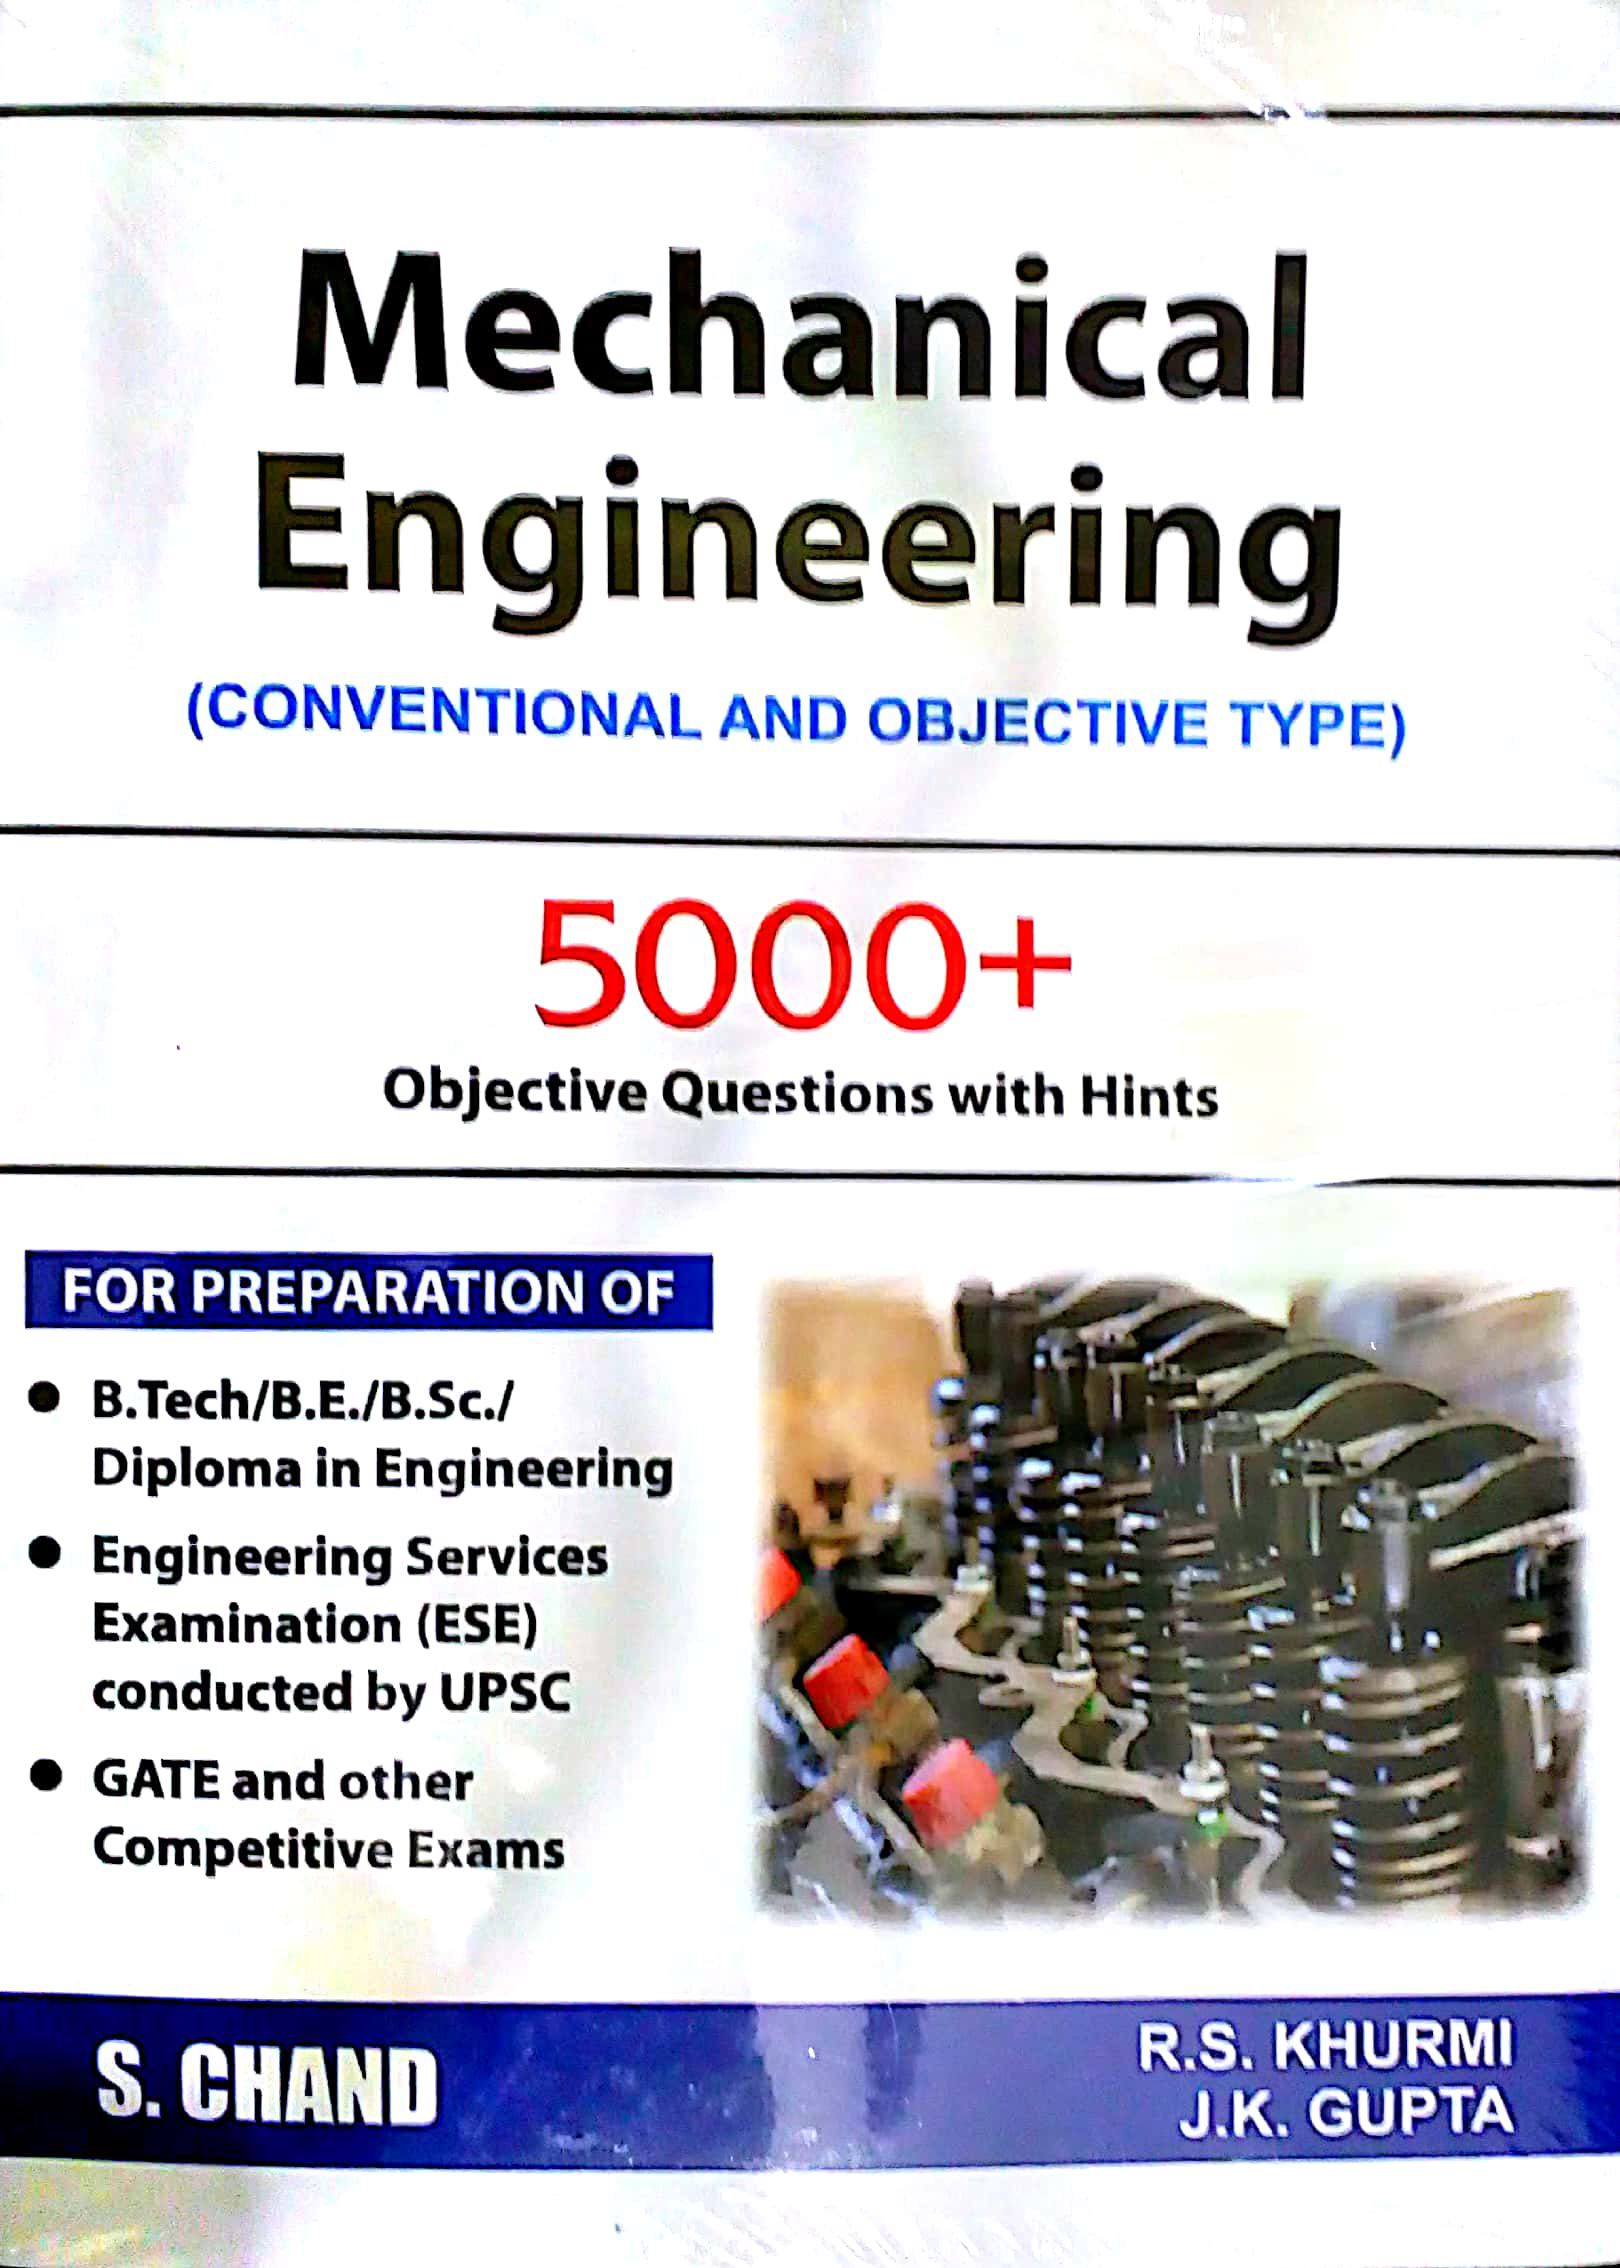     			Mechanical Engineering : Conventional and Objective Type Paperback (English)